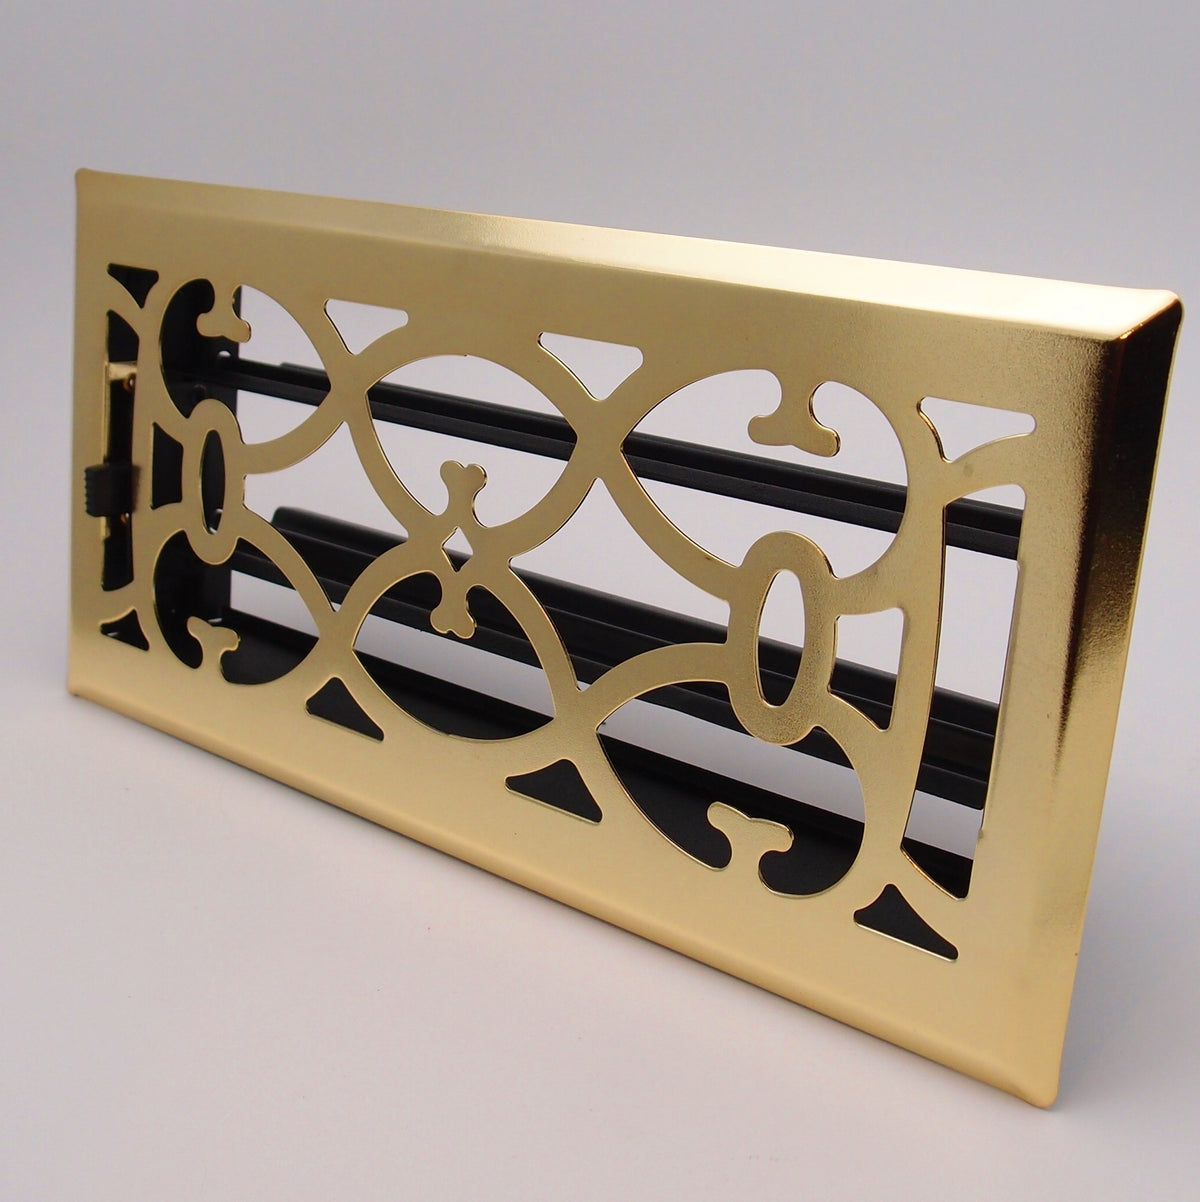 4&quot; X 10&quot; Brass Victorian Floor Register Grille - Modern Contempo Decorative Grate - HVAC Vent Duct Cover - Brass Plated